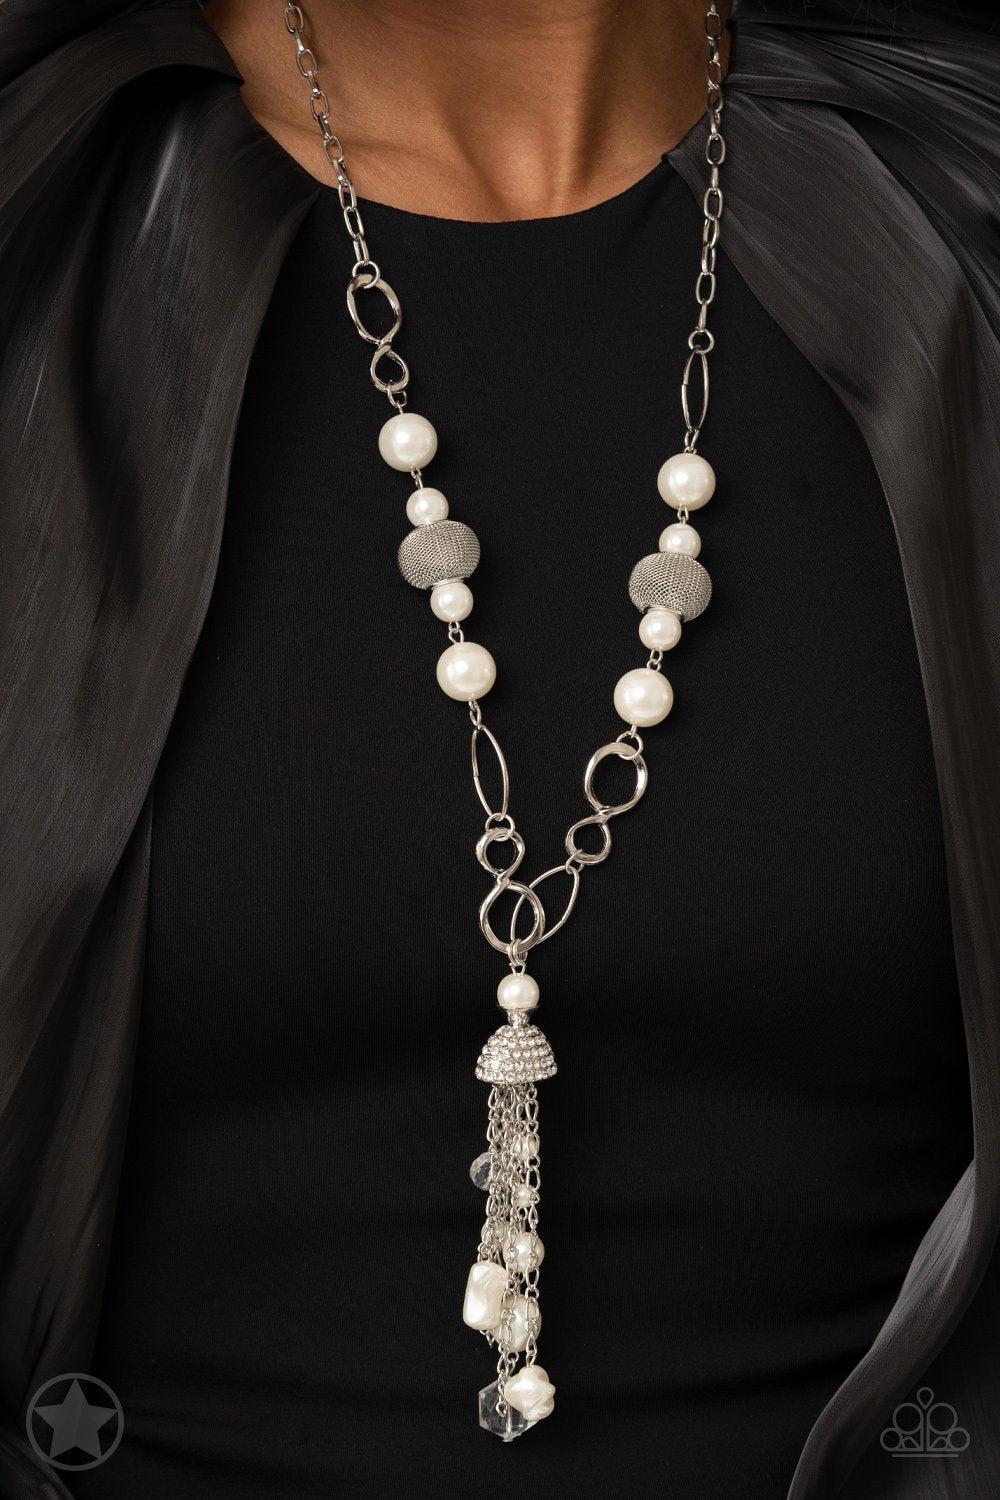 Designated Diva Long White Tassel Necklace and matching Earrings - Paparazzi Accessories - model -CarasShop.com - $5 Jewelry by Cara Jewels